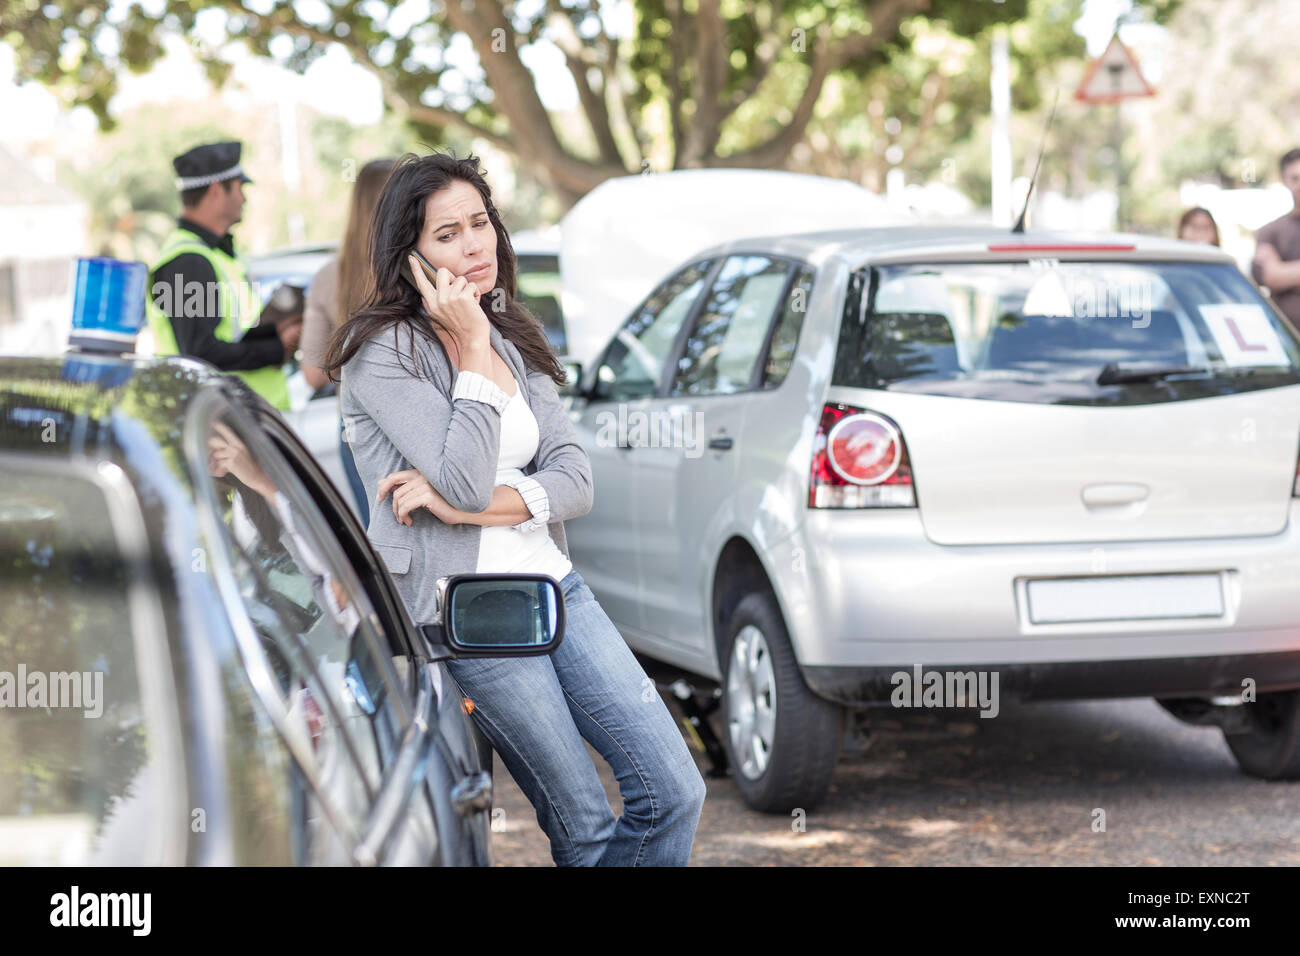 Woman on cell phone at car accident scene Stock Photo